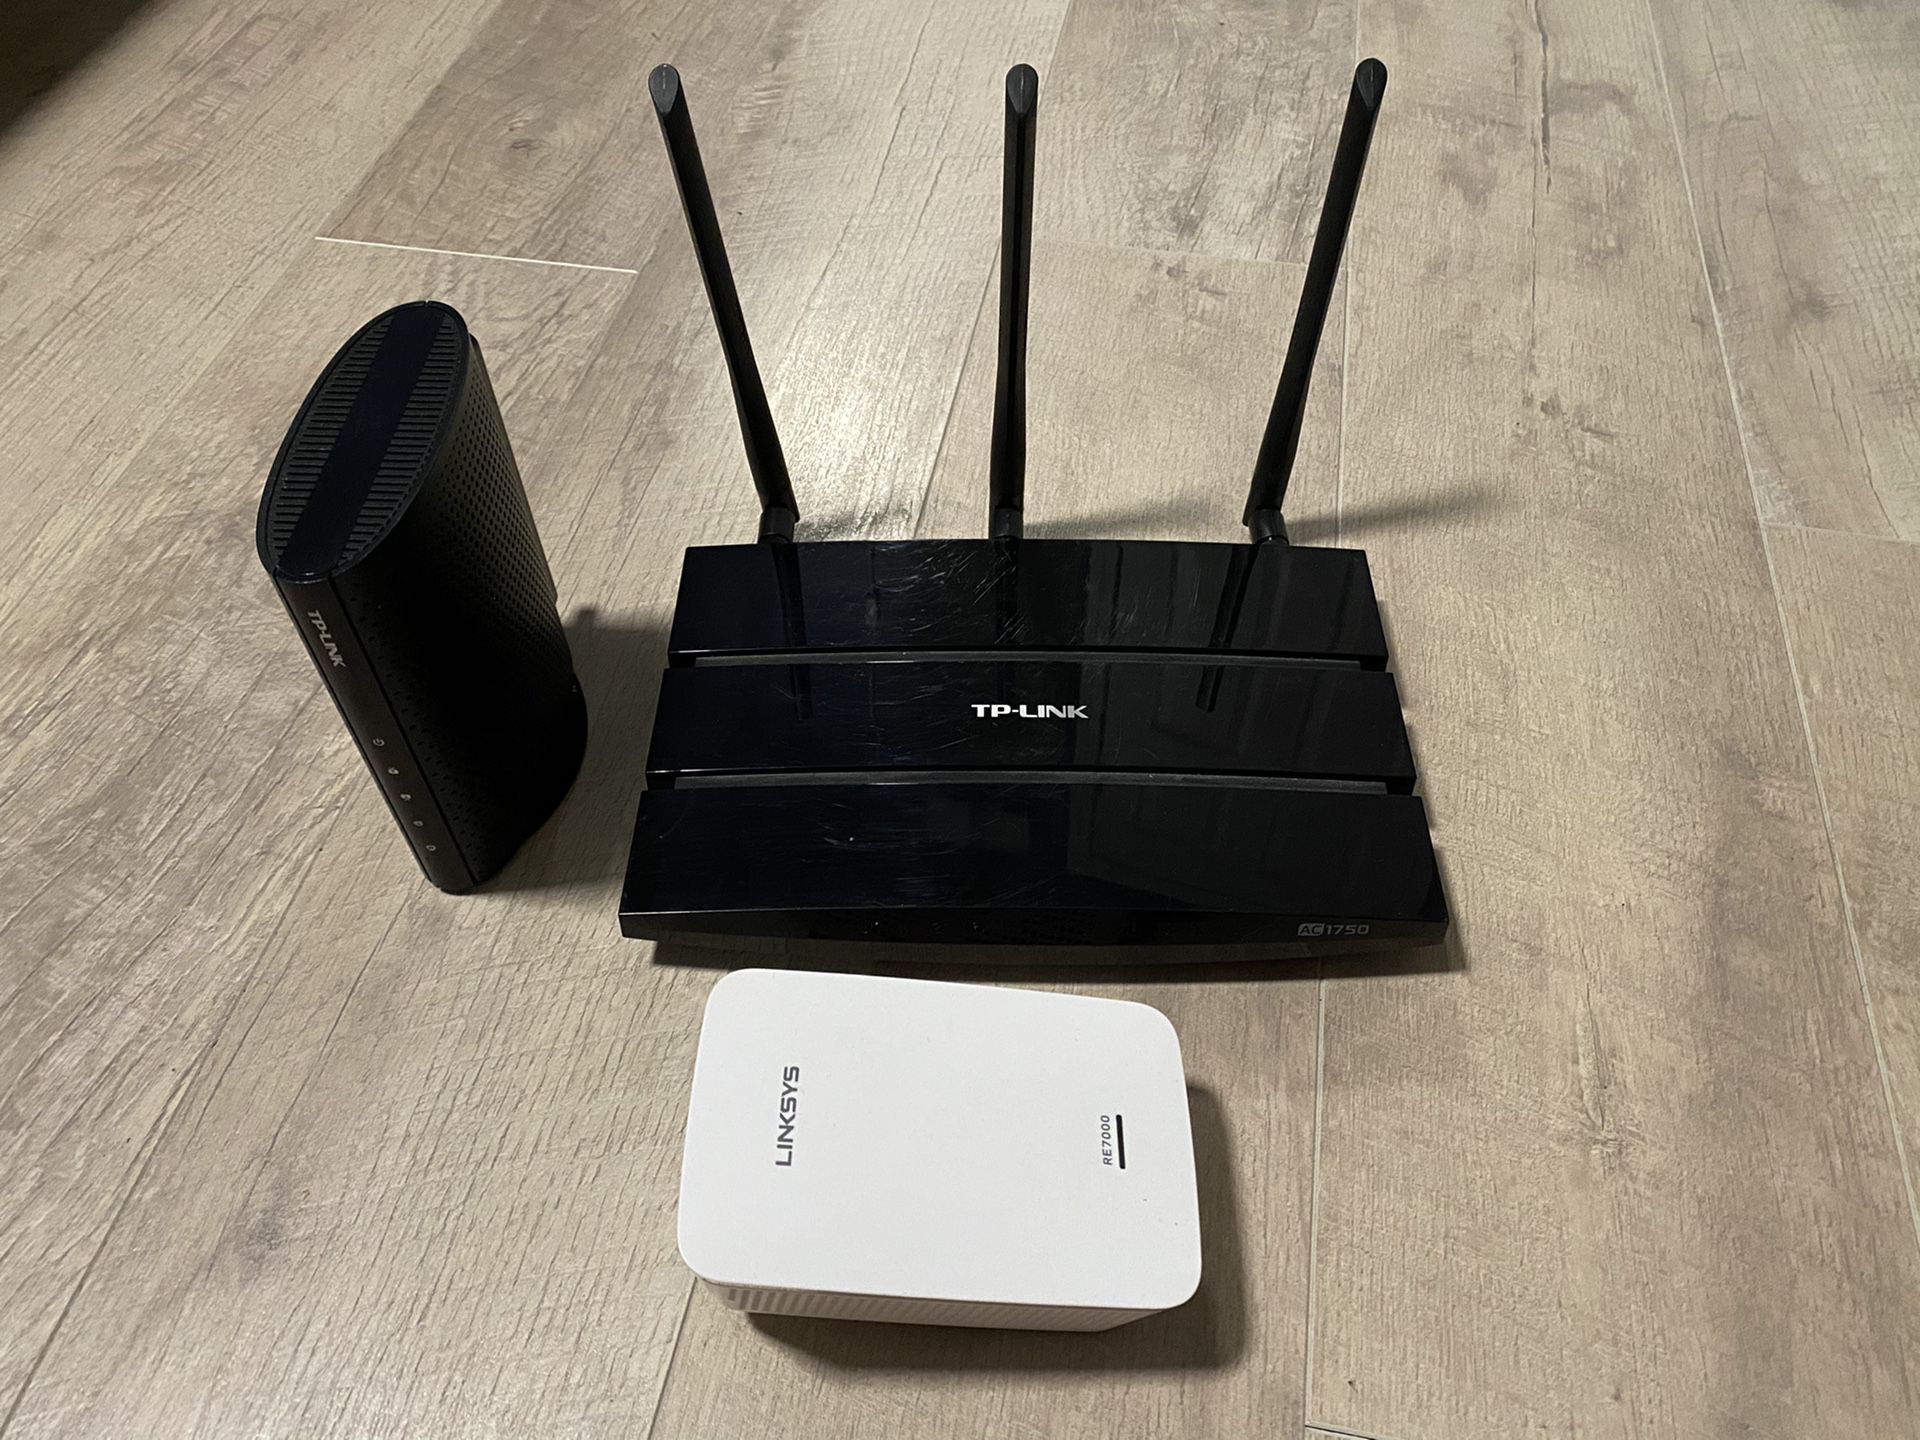 Cable modem, wifi router and wifi range extender